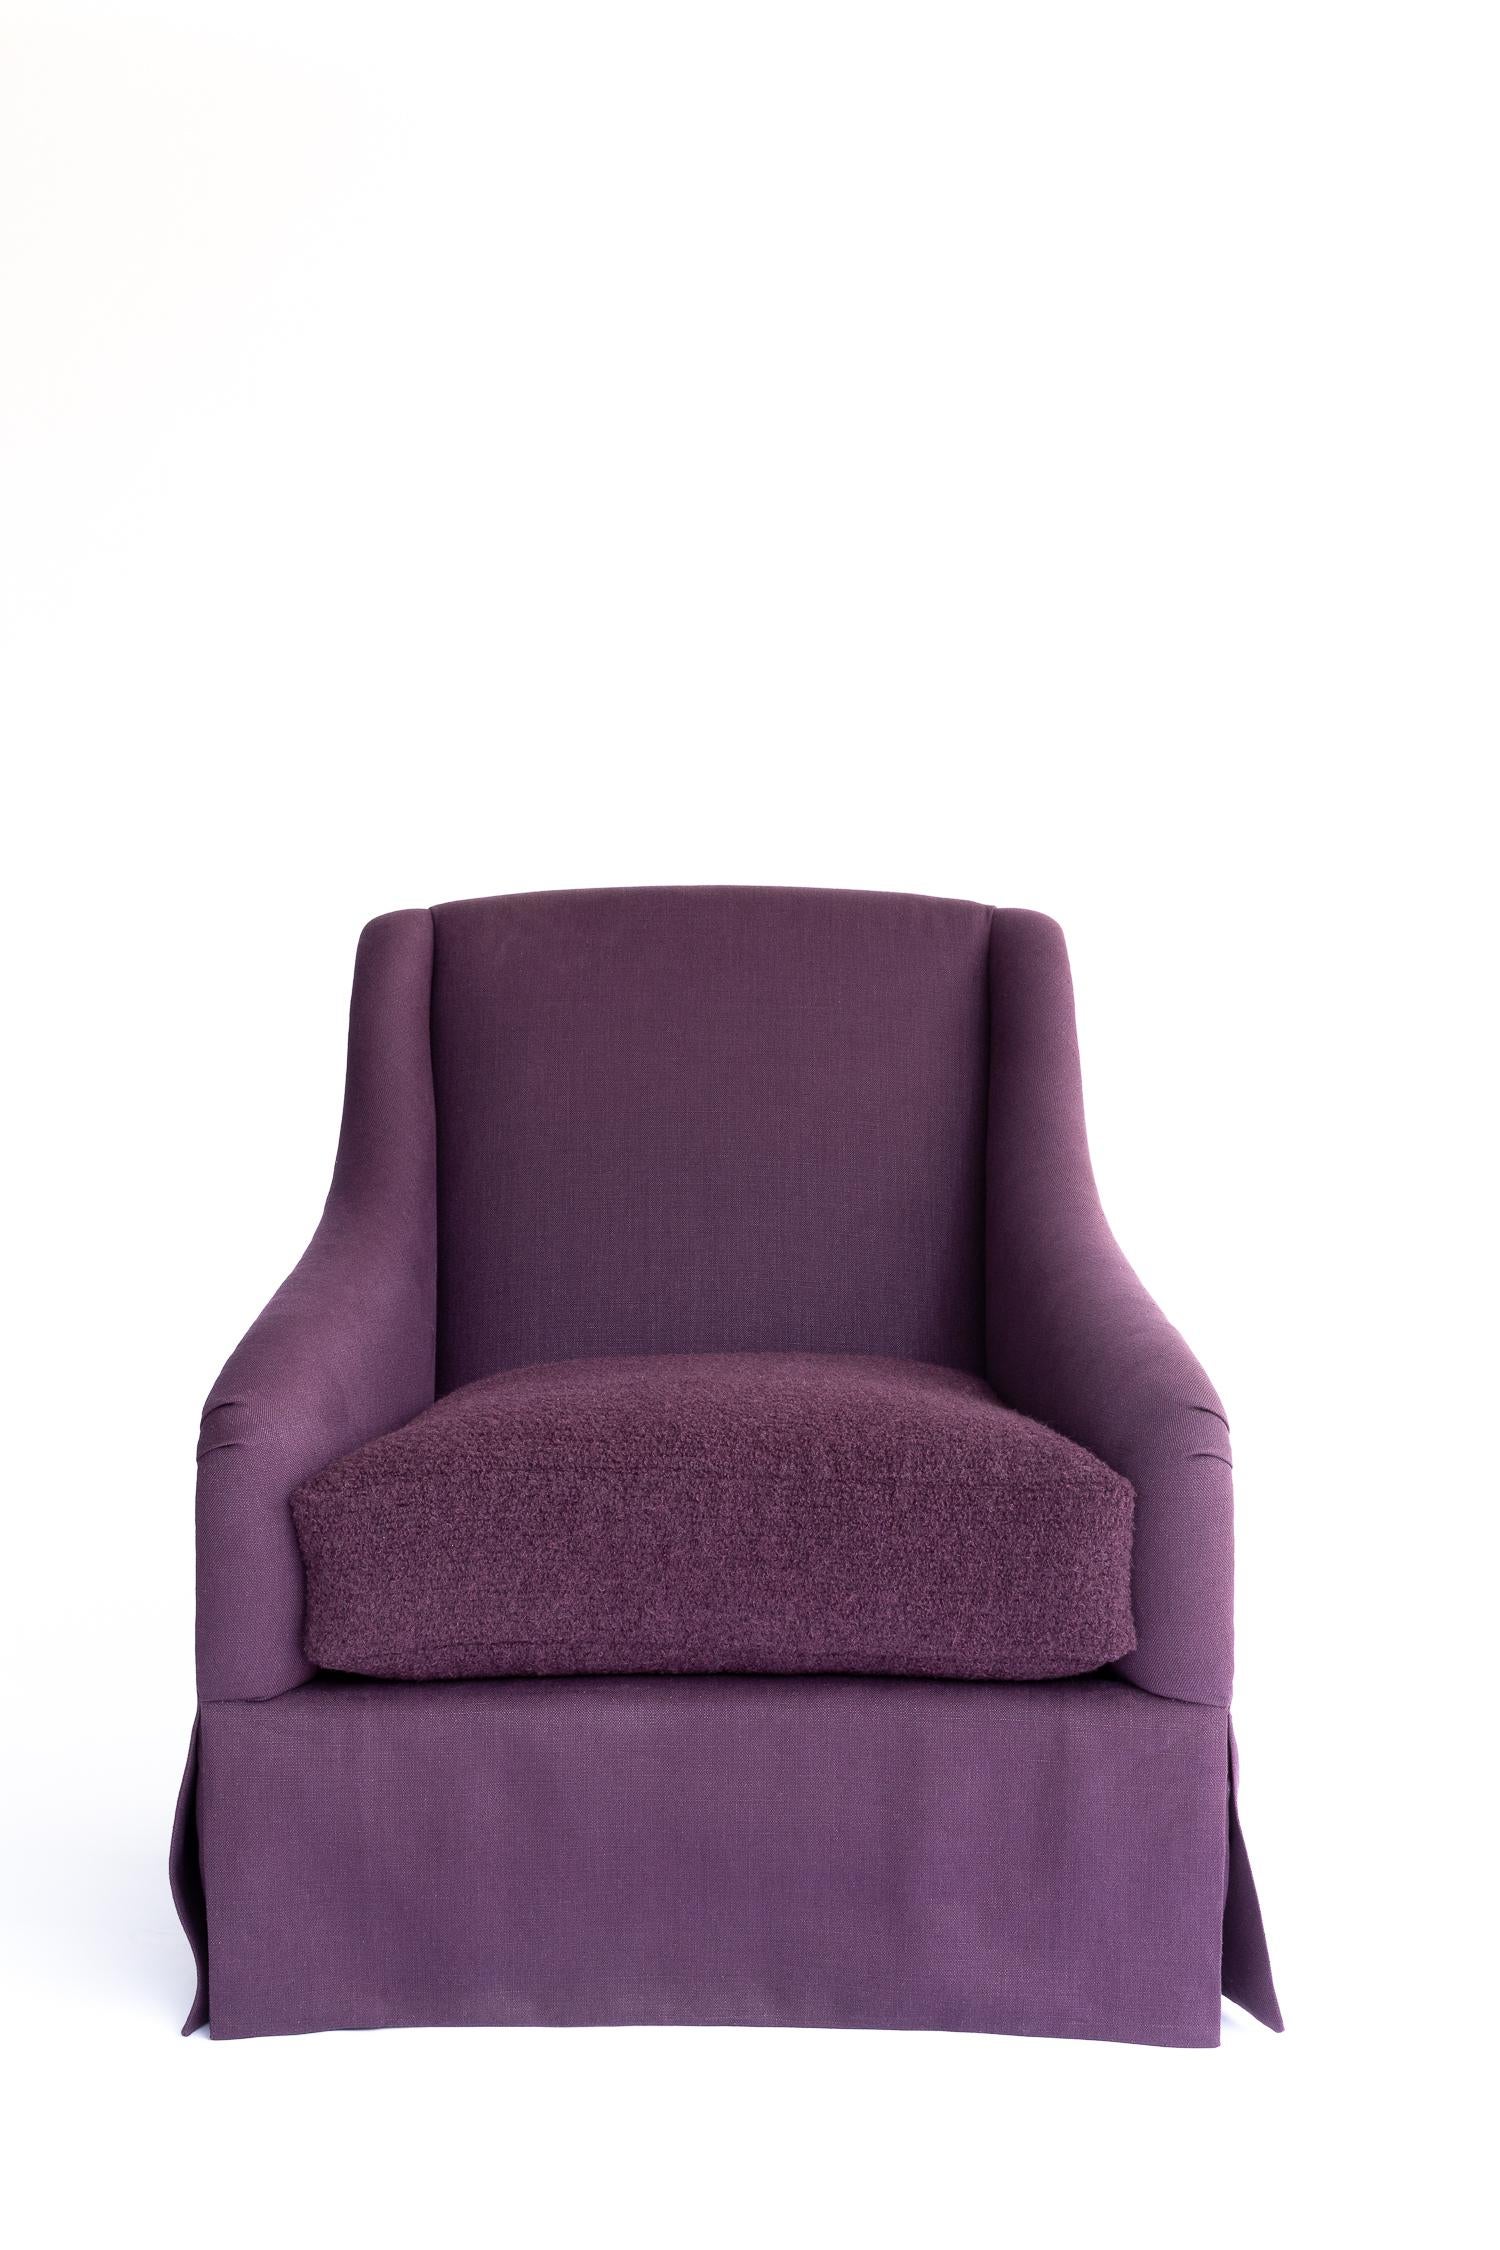 Contemporary Slope Arms Slip-Covered Armchair For Sale